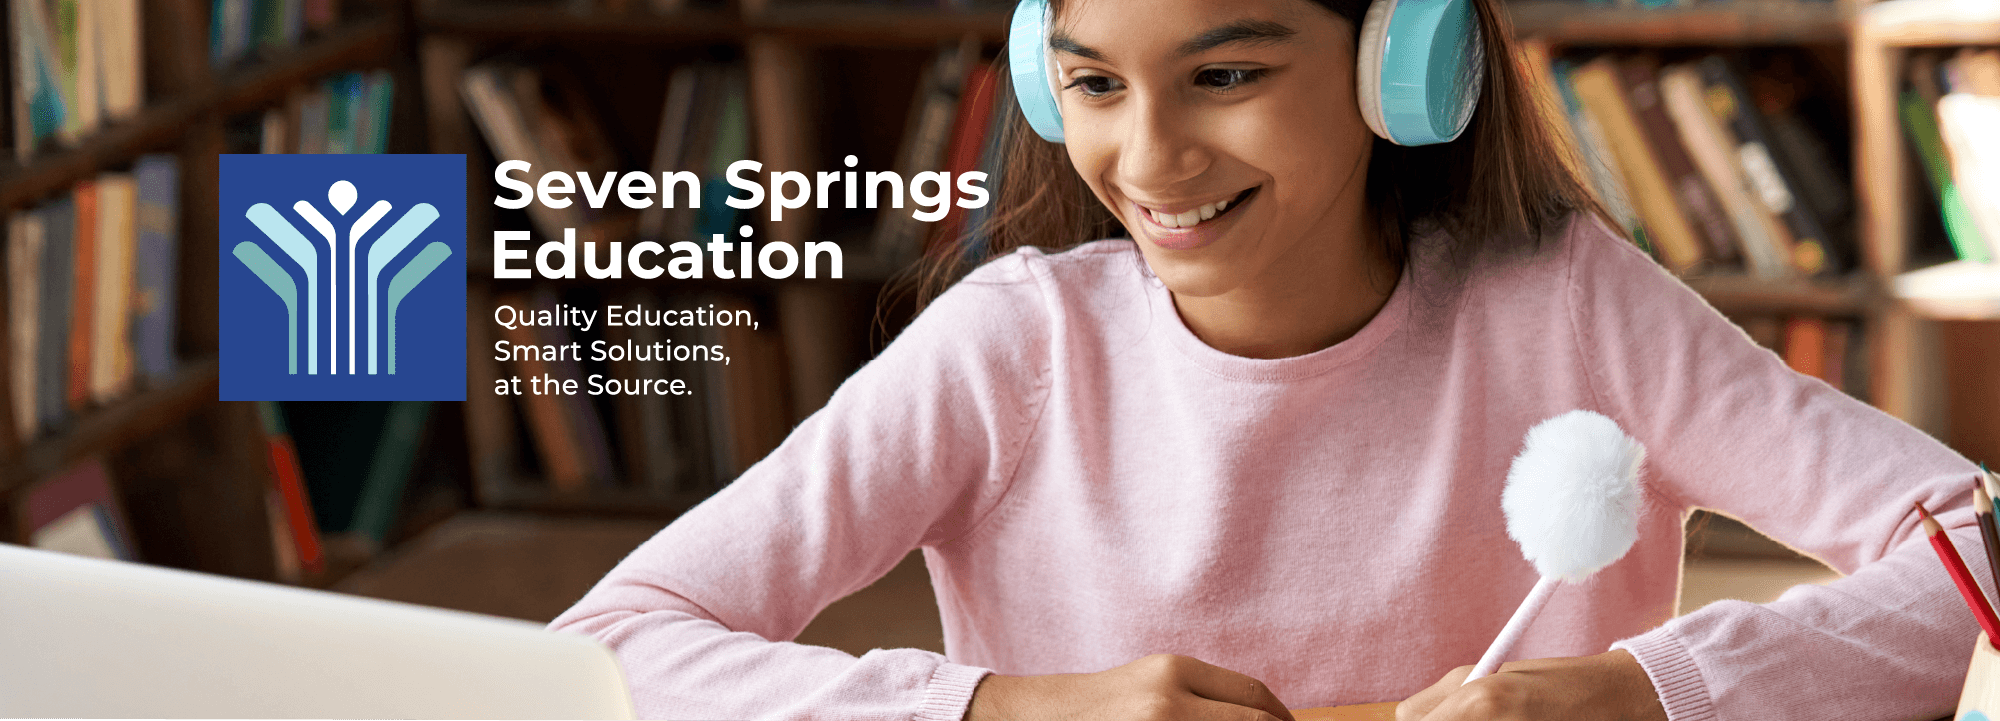 Heading: Seven Springs Education - Quality Education, Smart Solutions, at the Source.